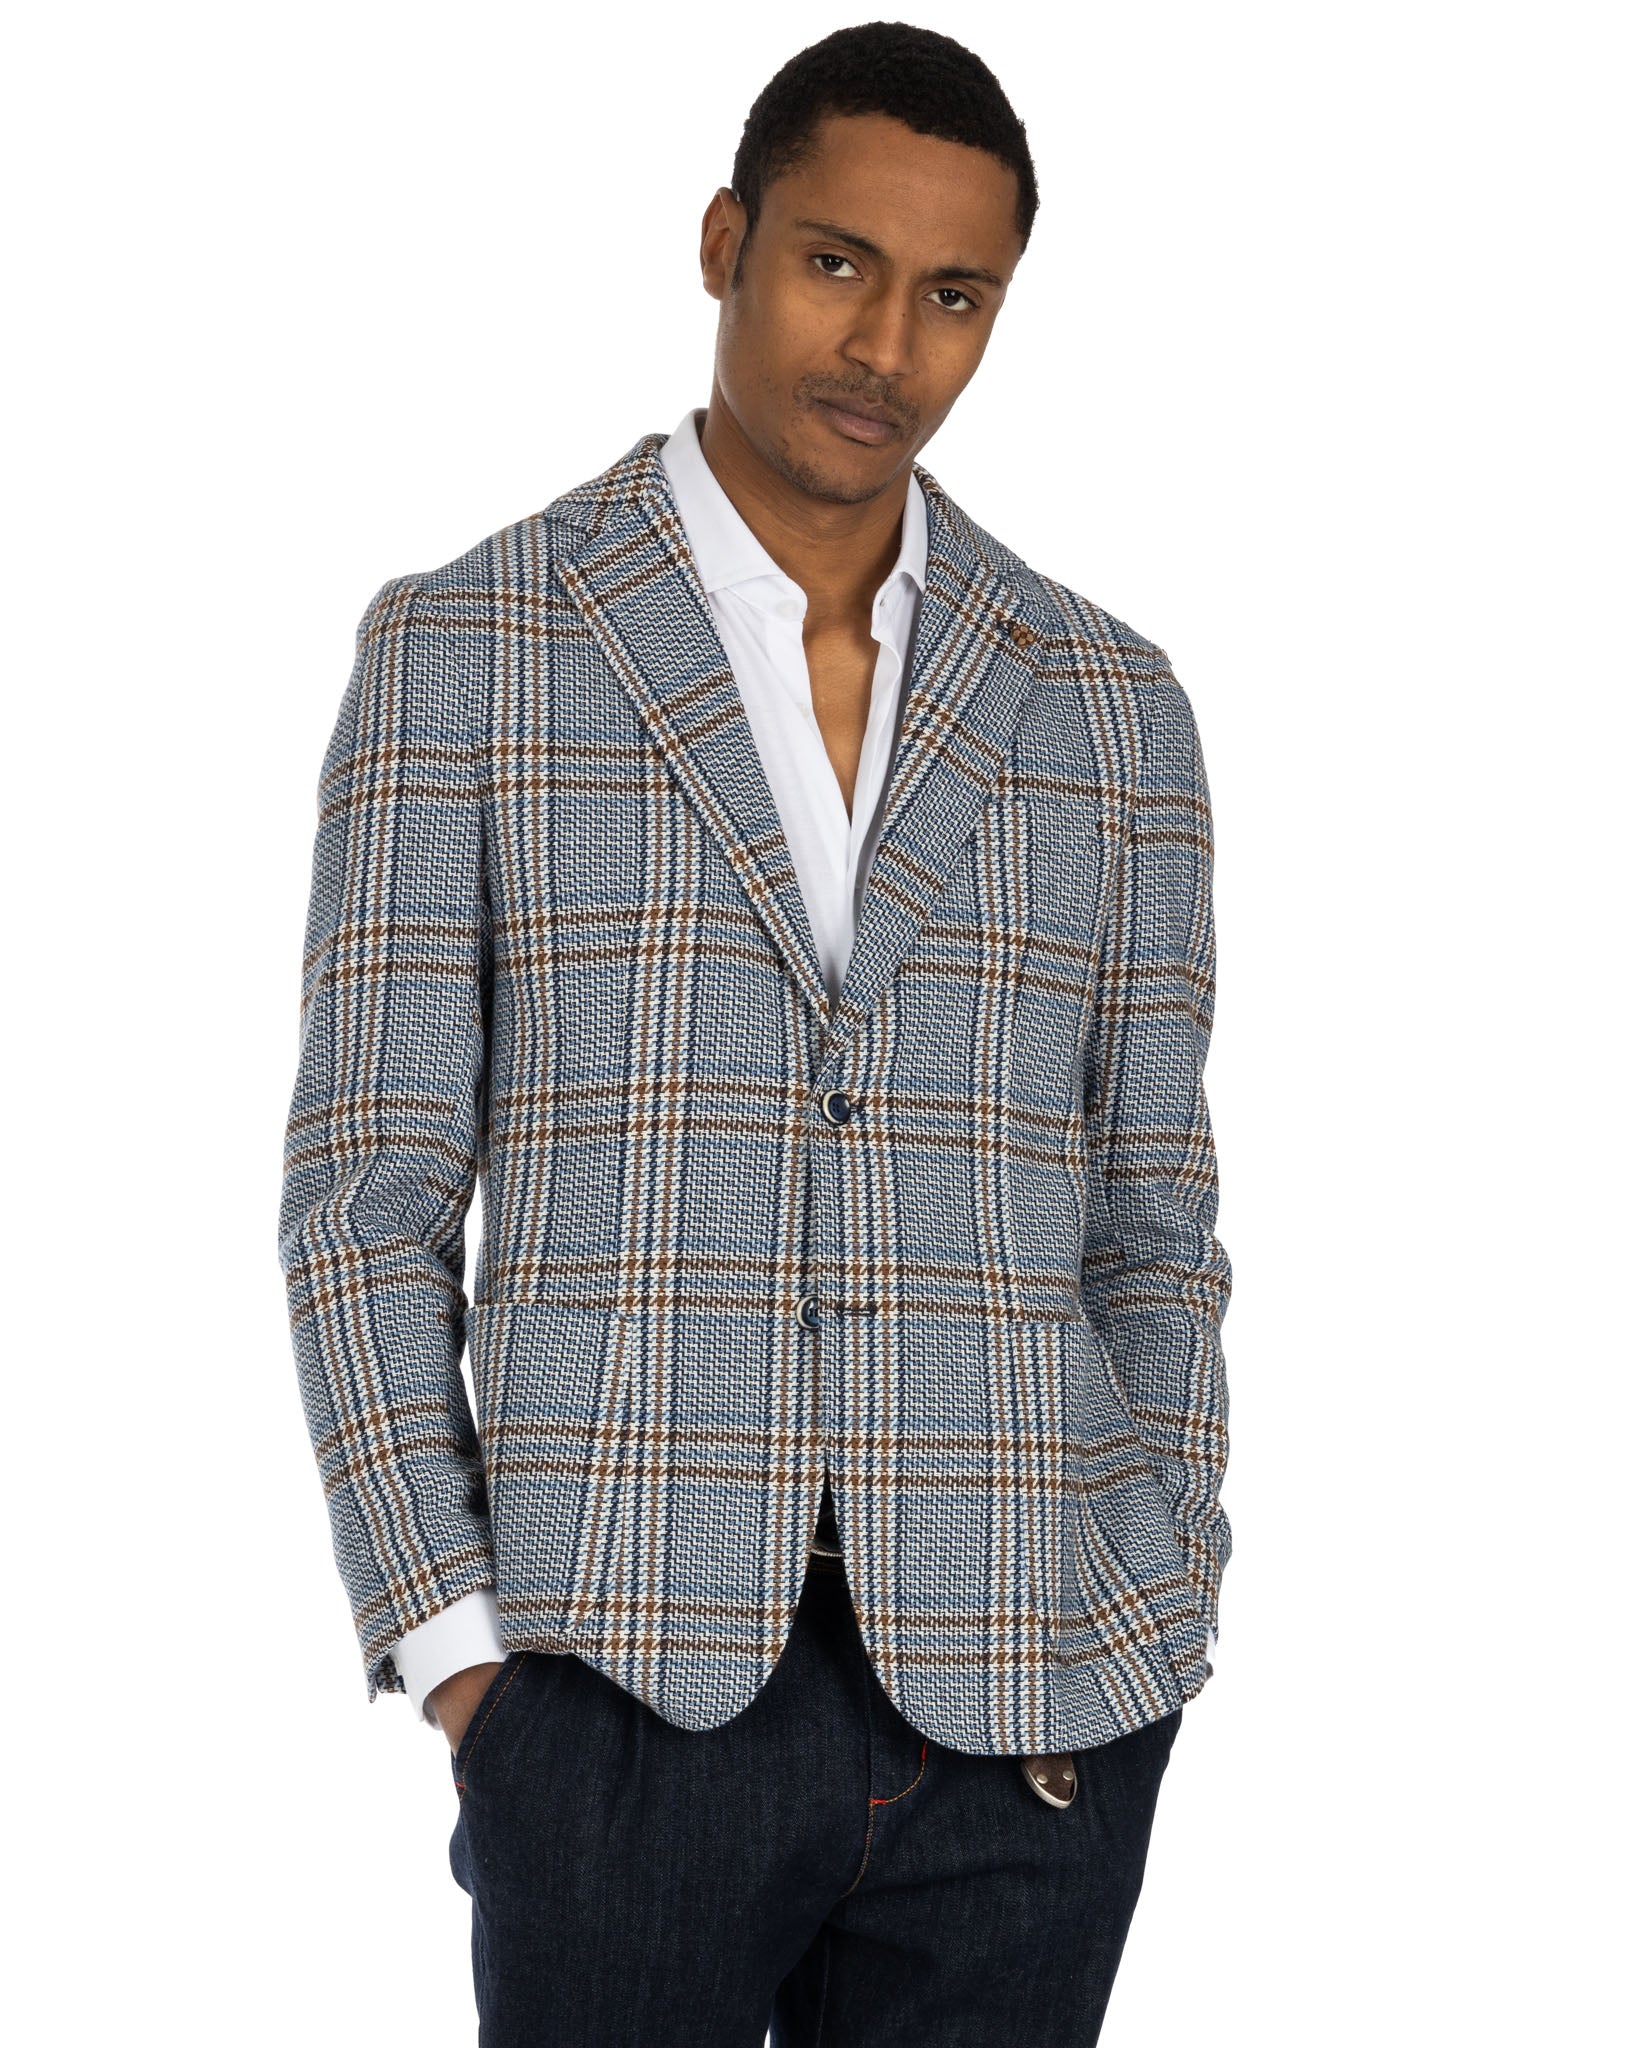 Parma - blue and brown checked jacket